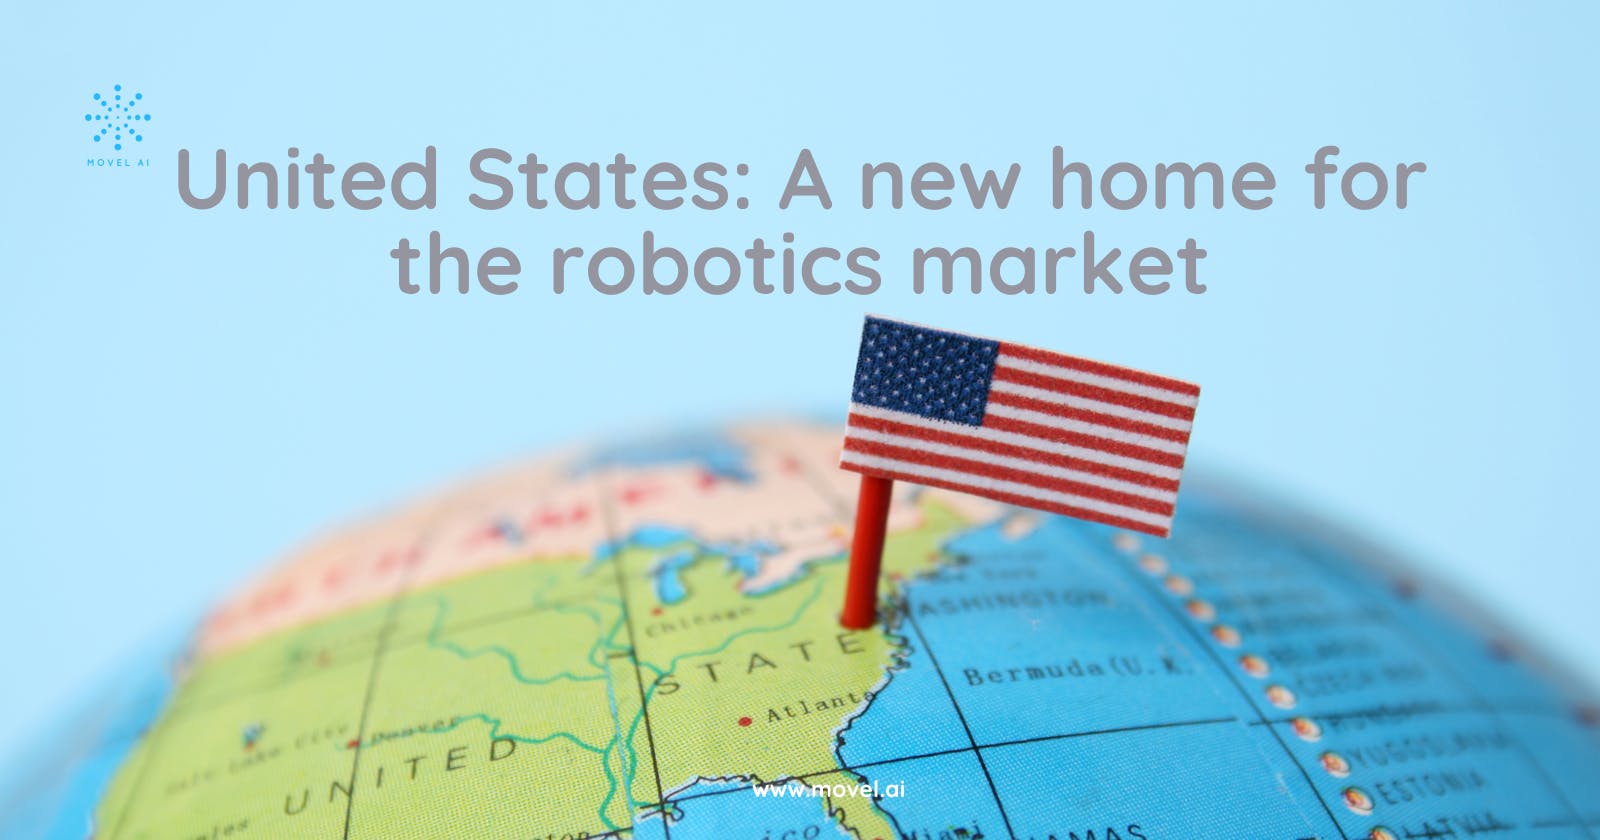 United States: A new home for the robotics market